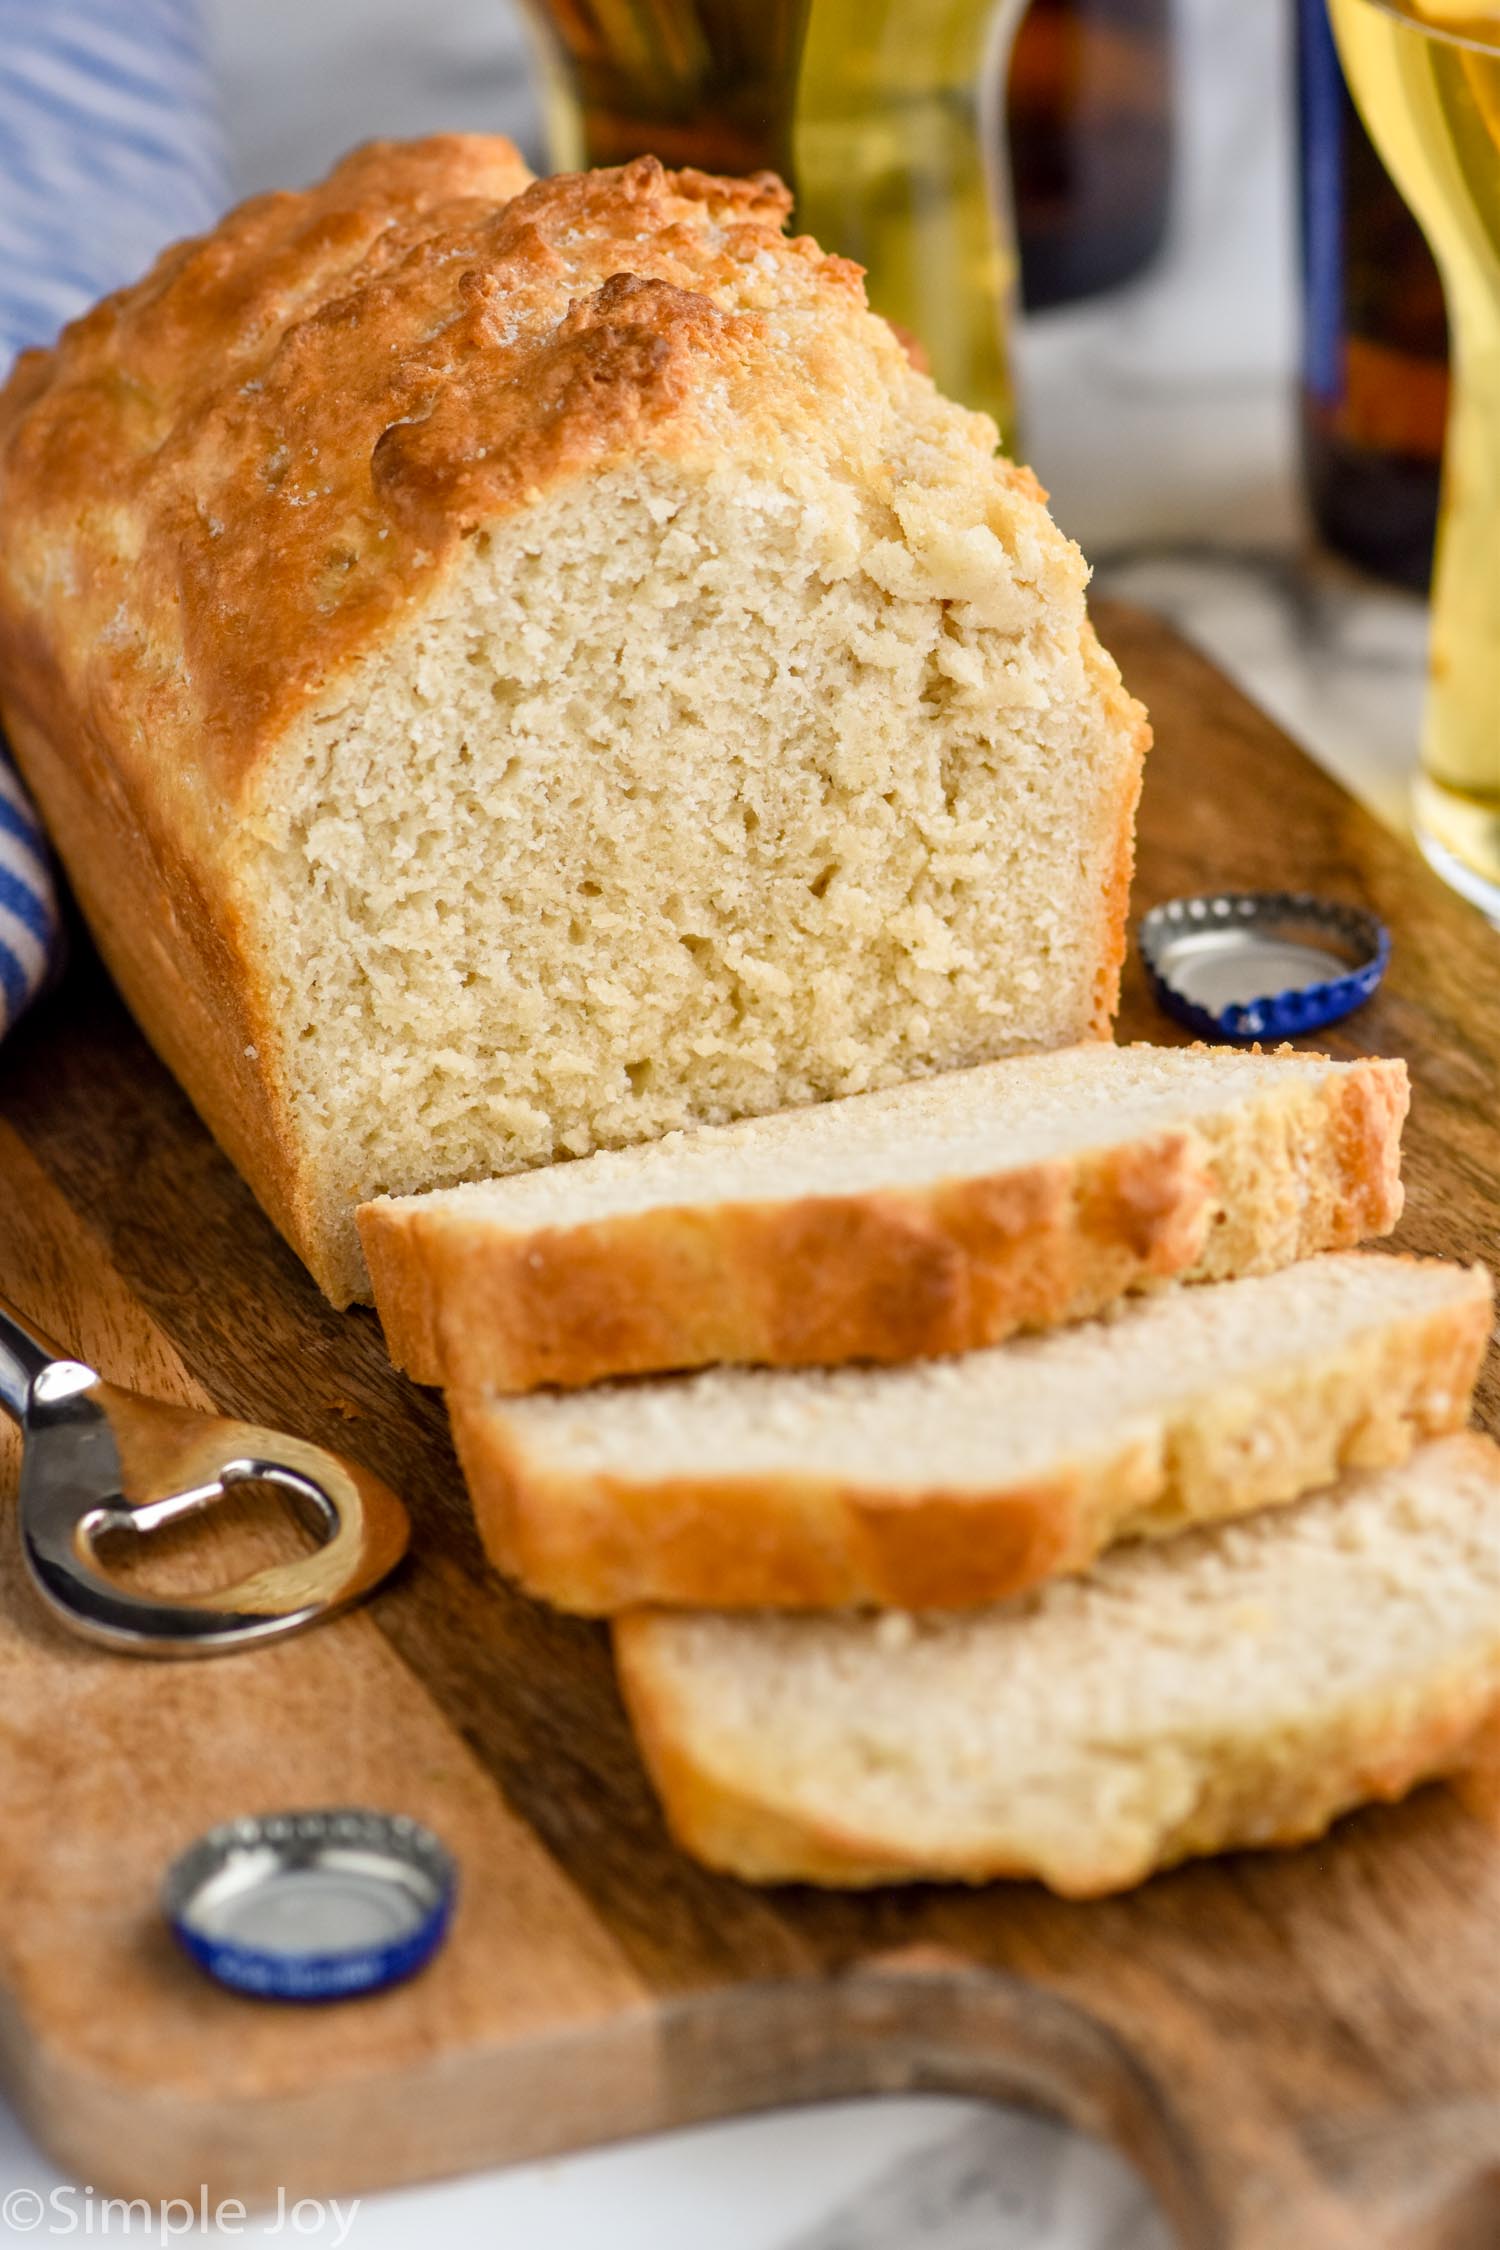 4 Solutions for Baking Light and Airy Bread